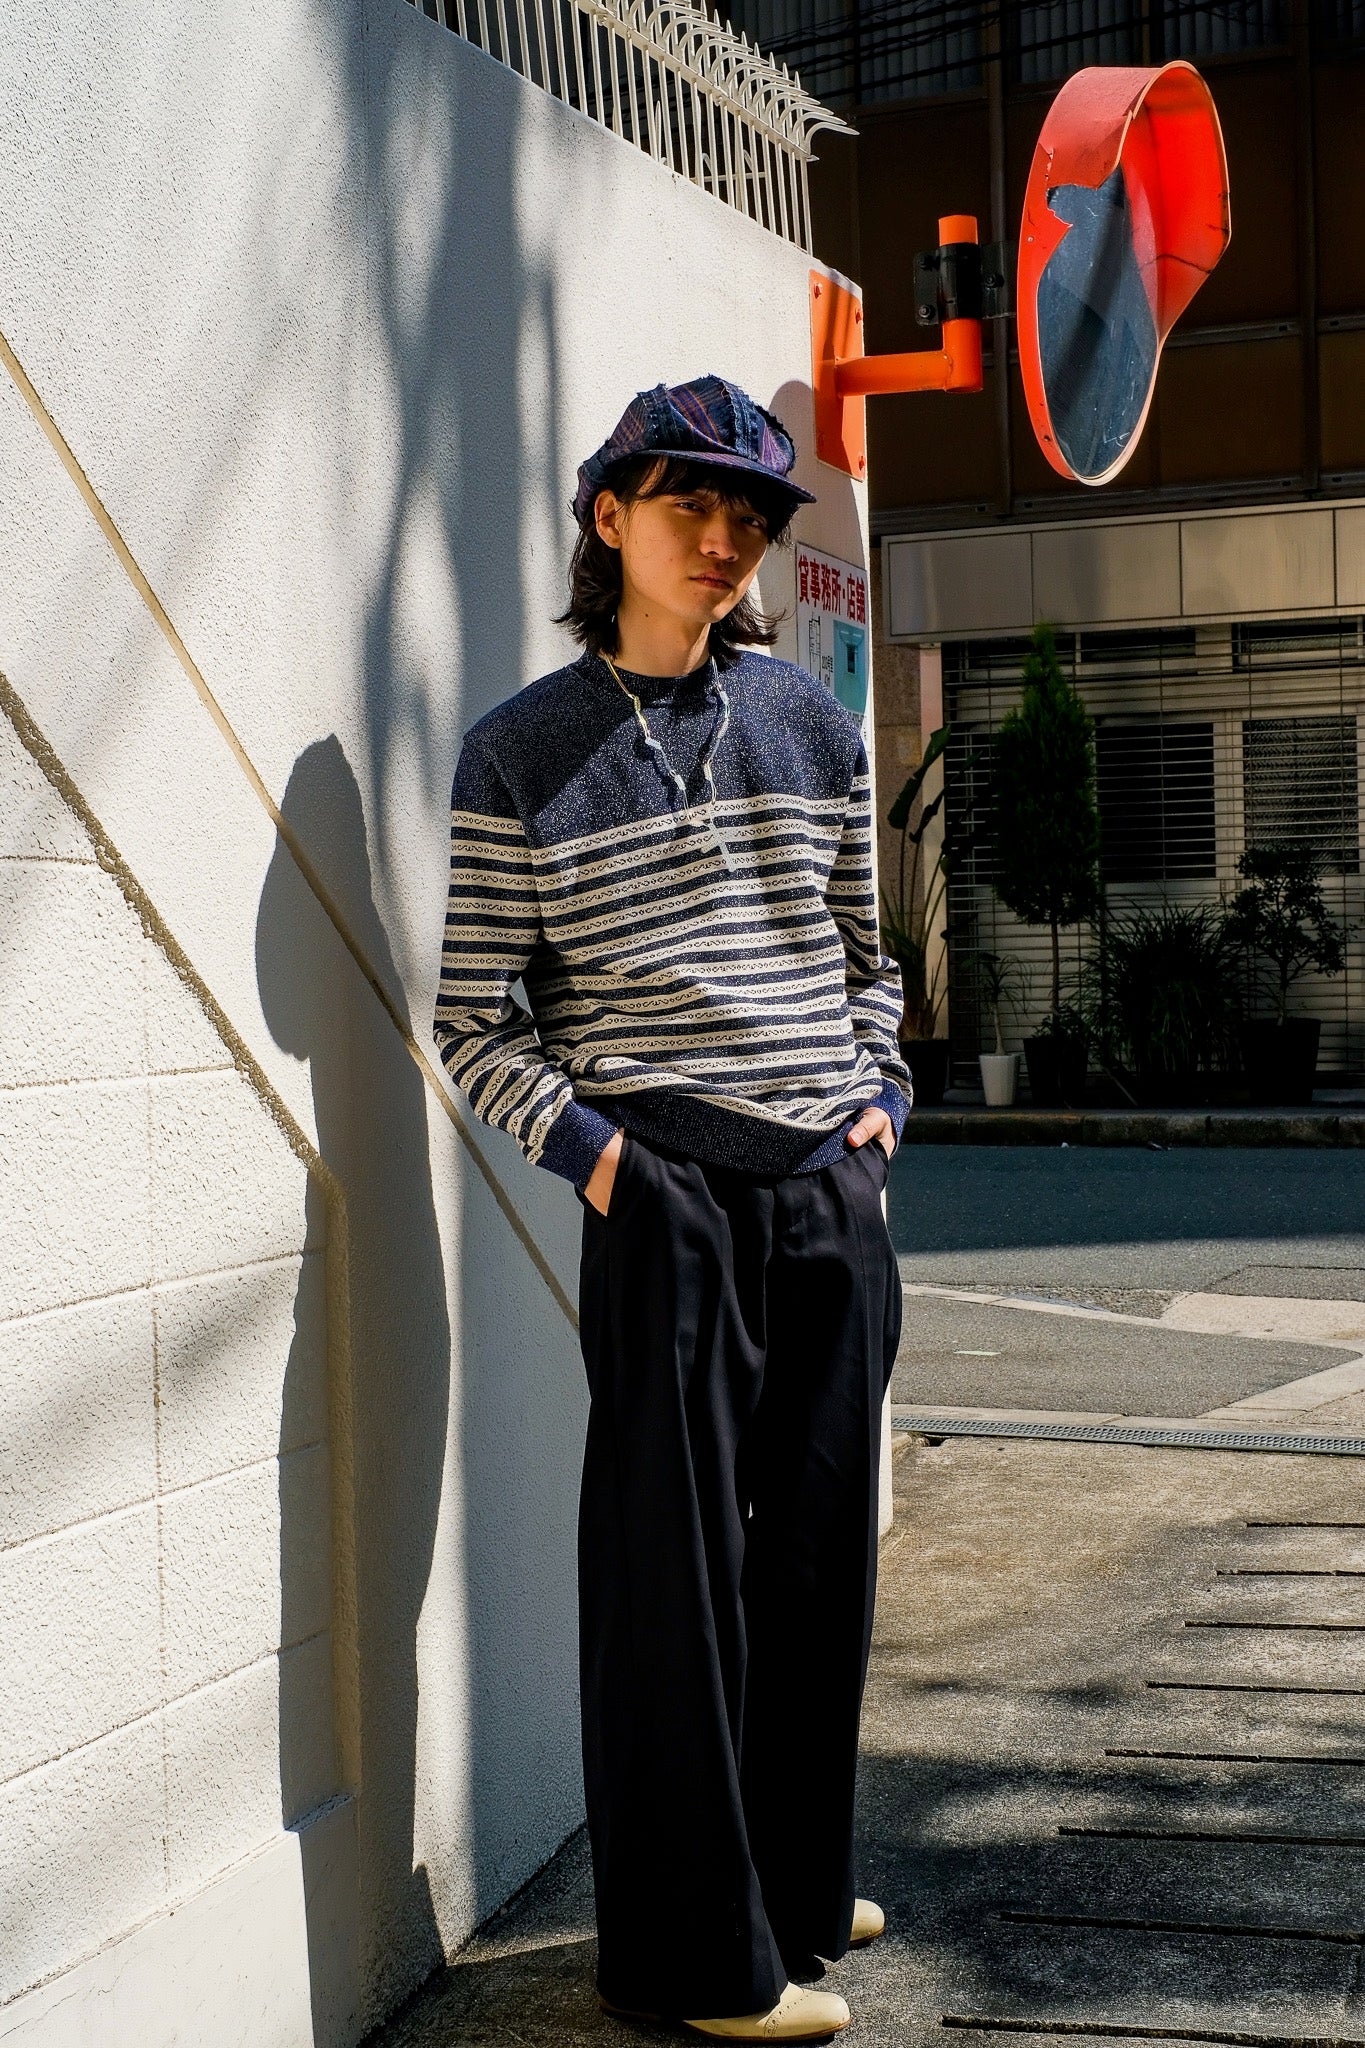 Image of wearing of SHINEBORDERKNIT of 22ss of Taigaigari